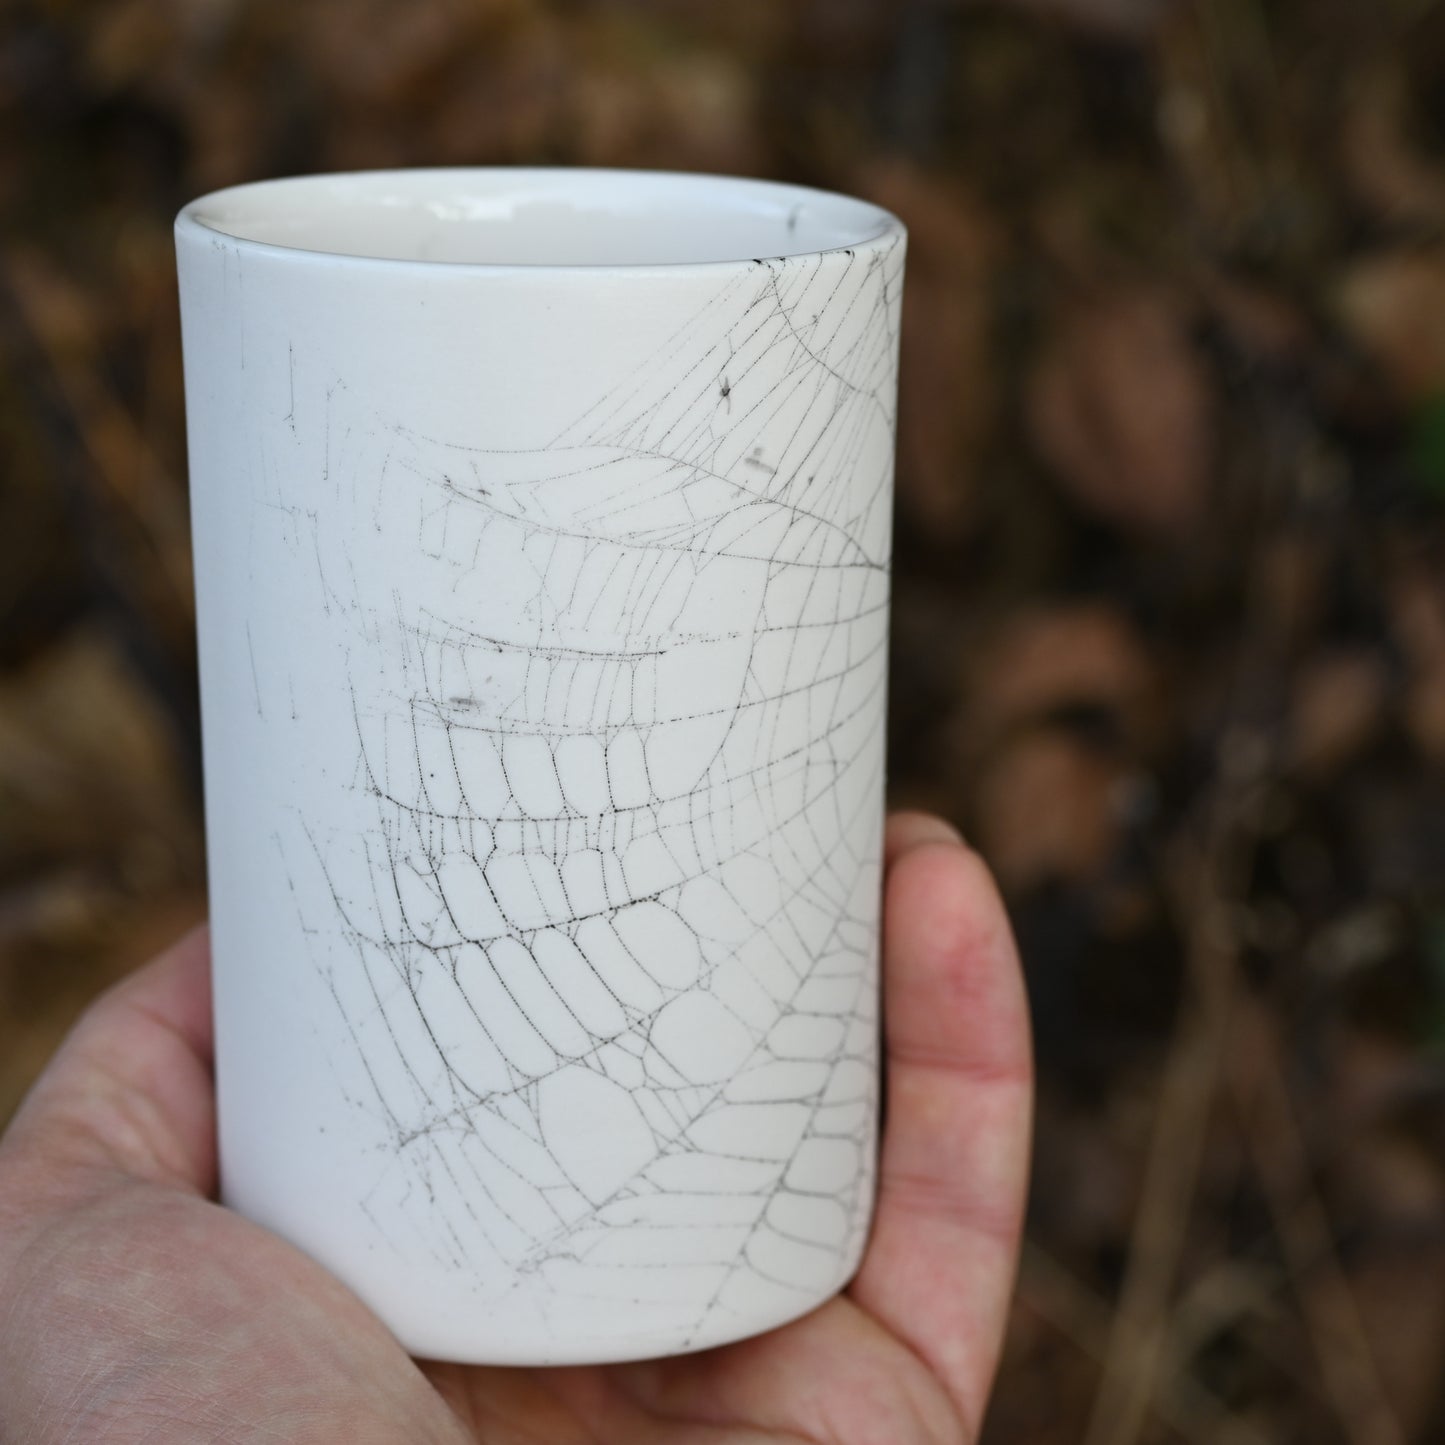 Web on Clay (089), Collected September 05, 2022